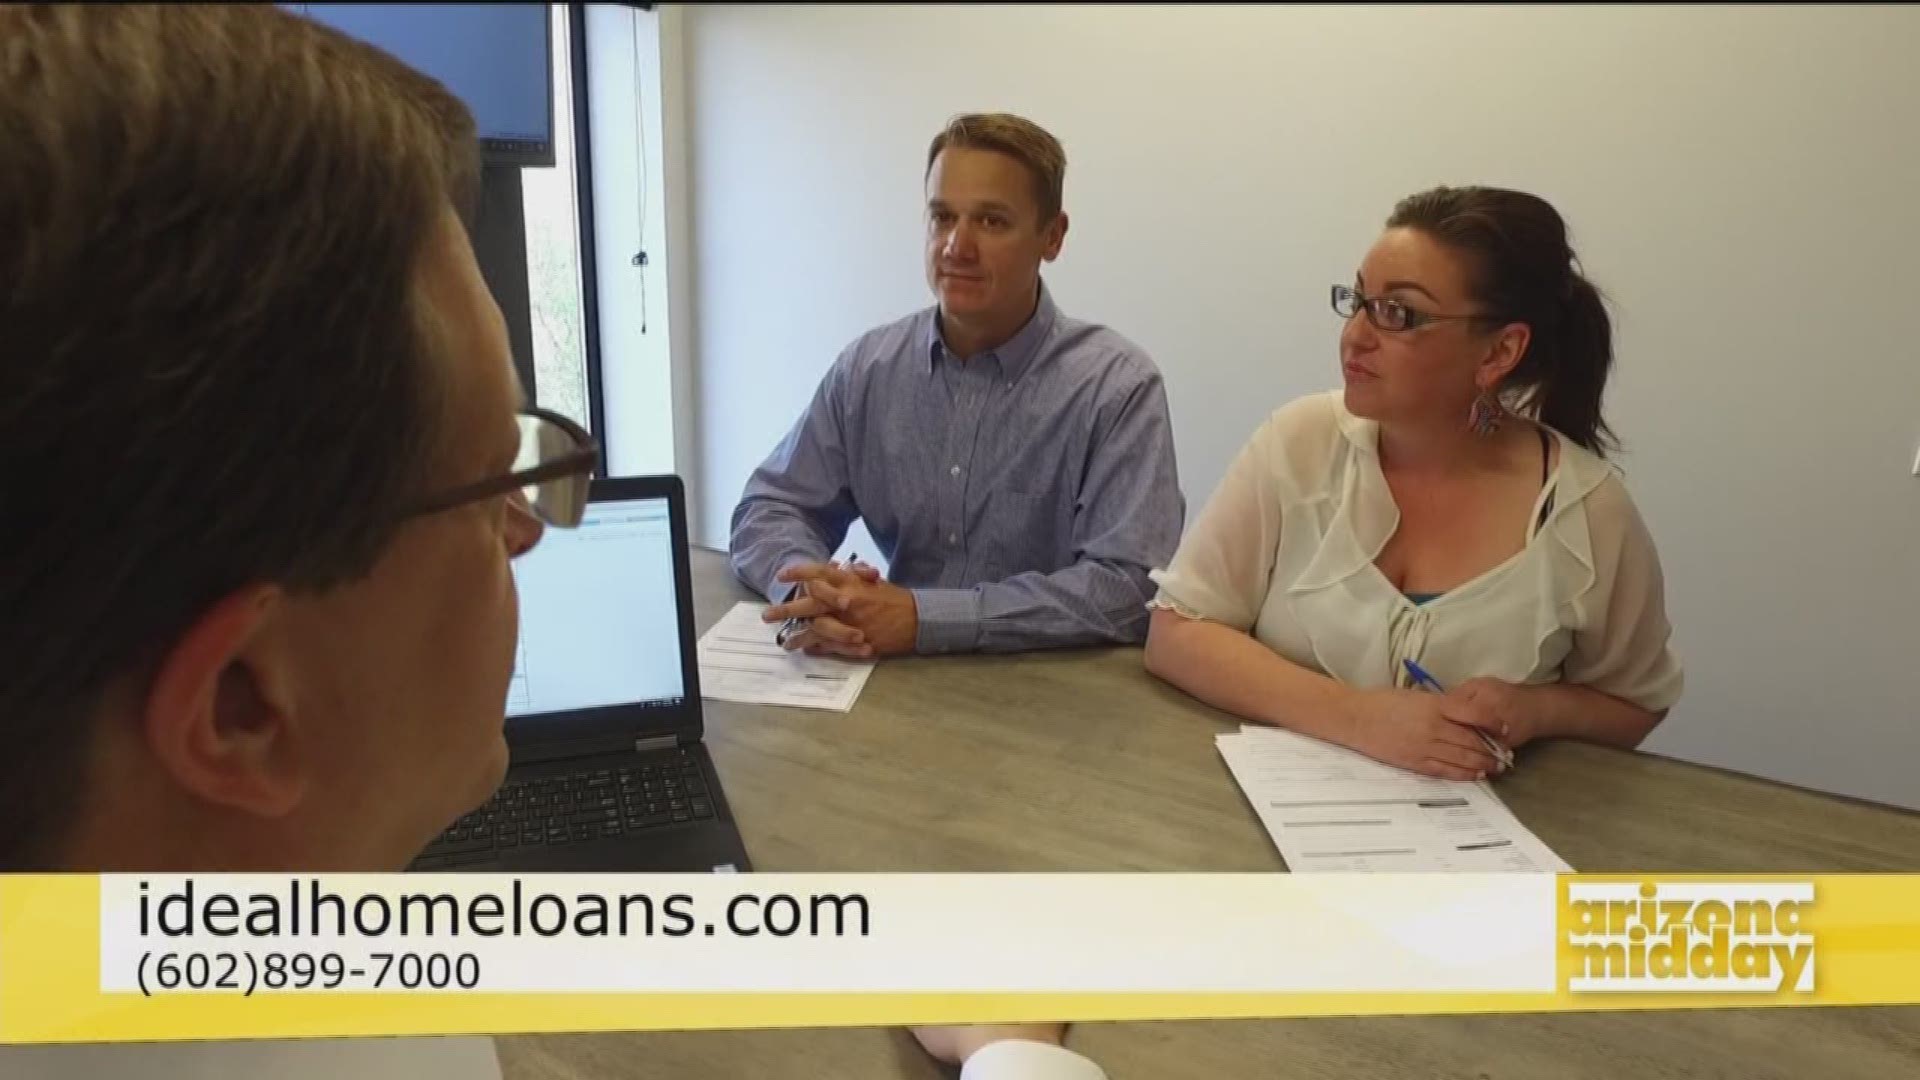 Brent Ivinson from Ideal Home Loans gives us tips on how to help veterans with their home loans.